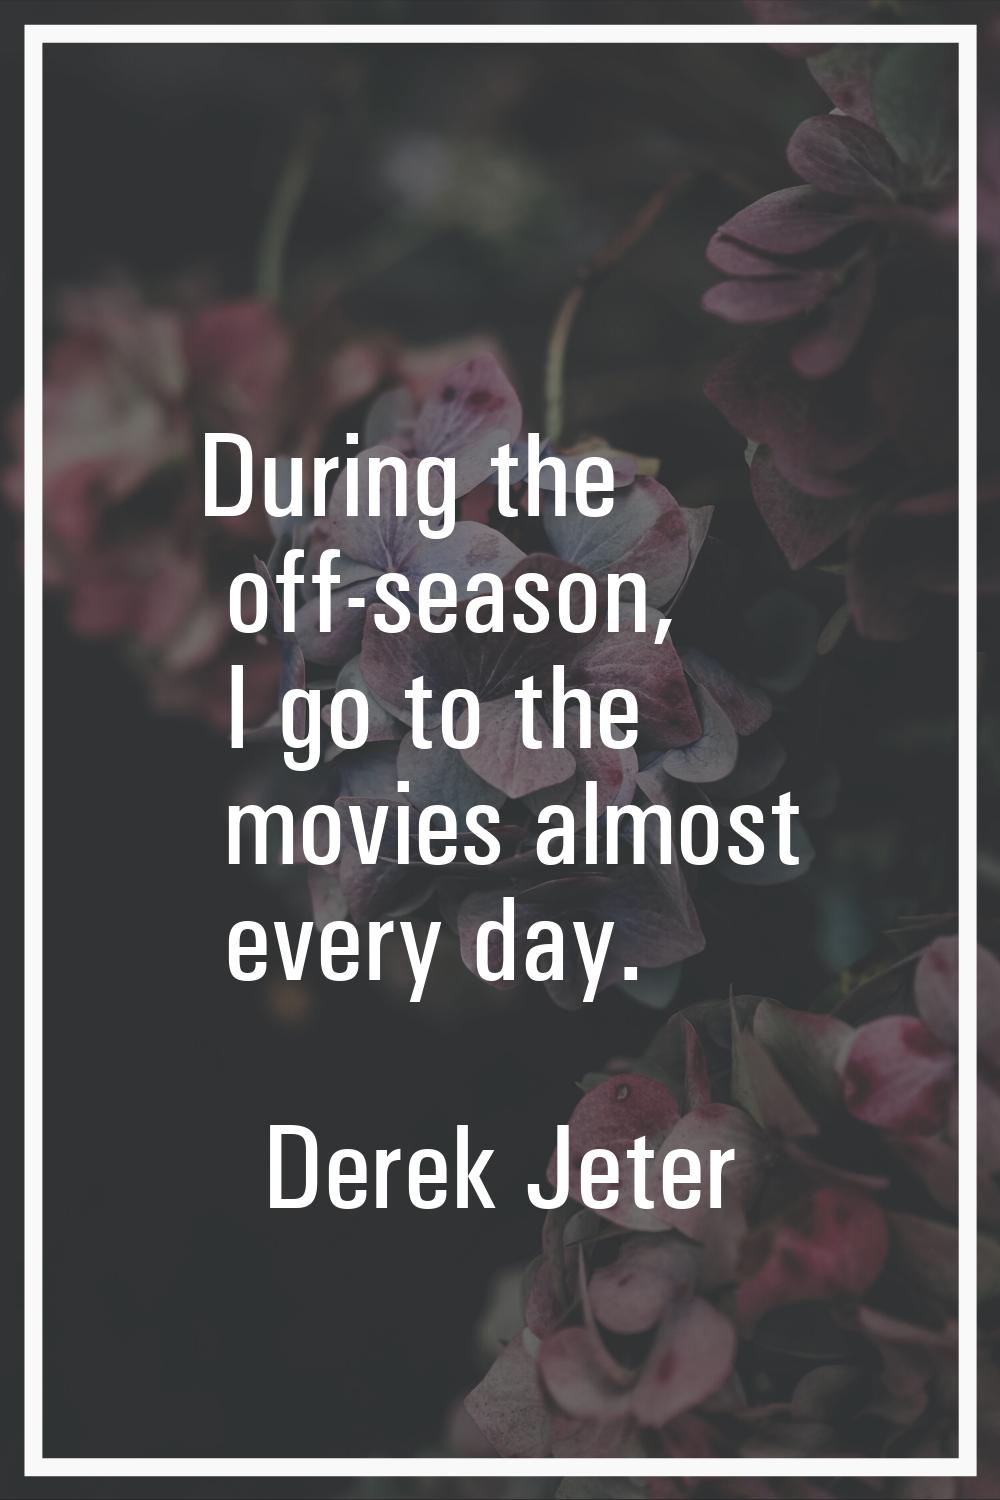 During the off-season, I go to the movies almost every day.